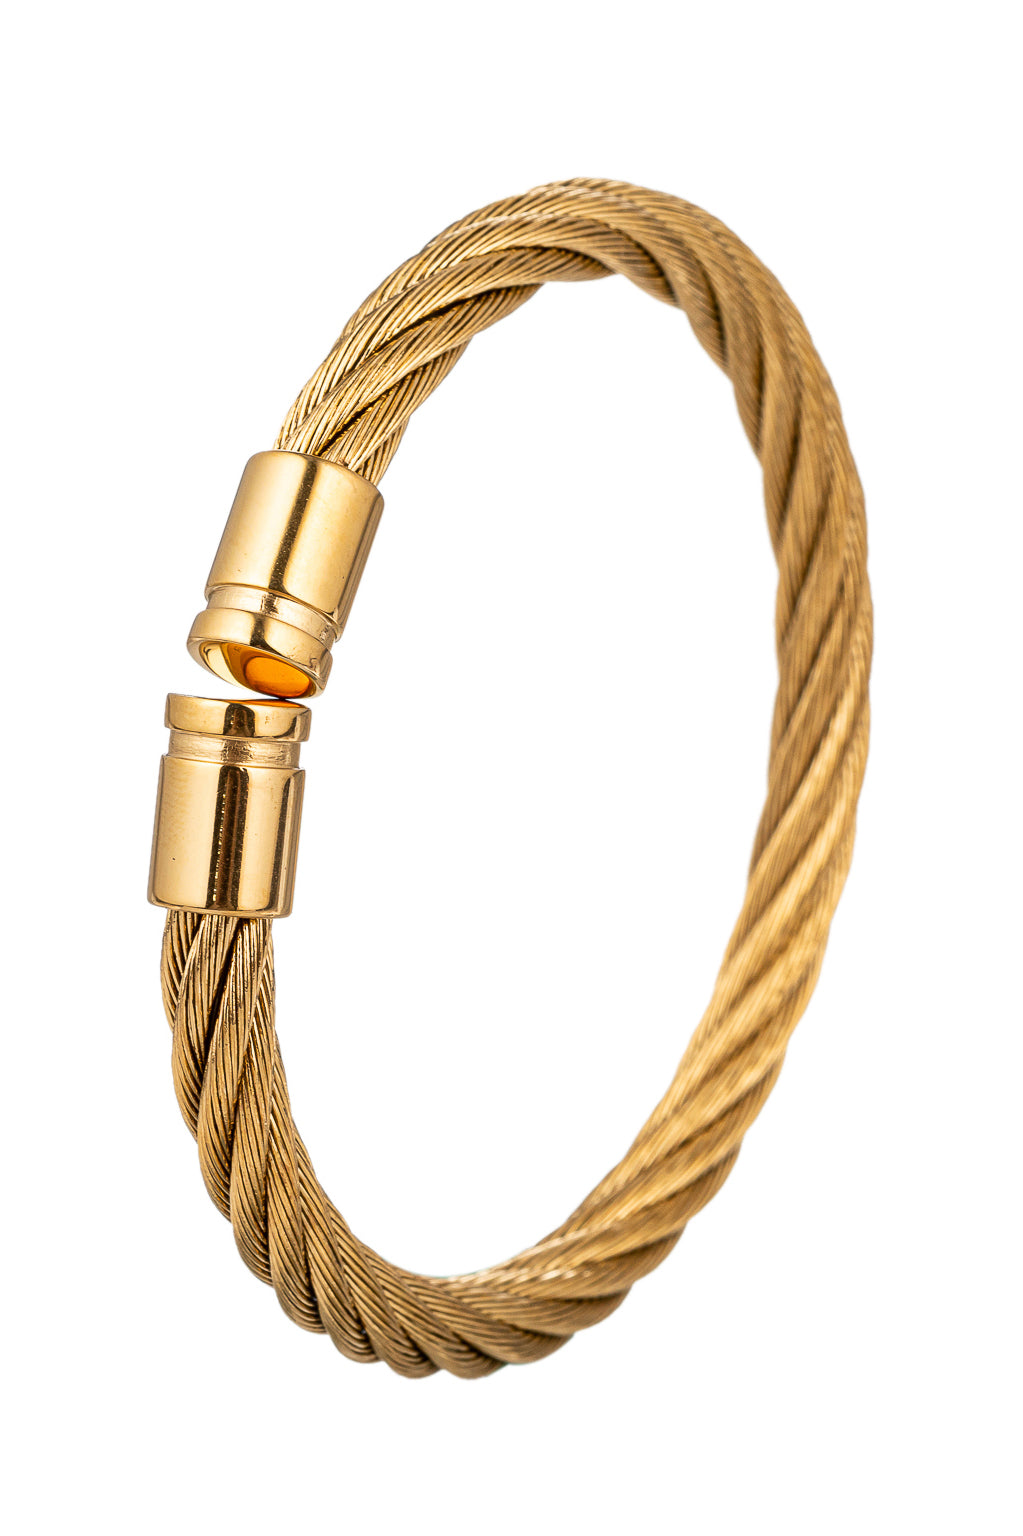 Elevate Your Look with the James Titanium Wire Cuff Bracelet.